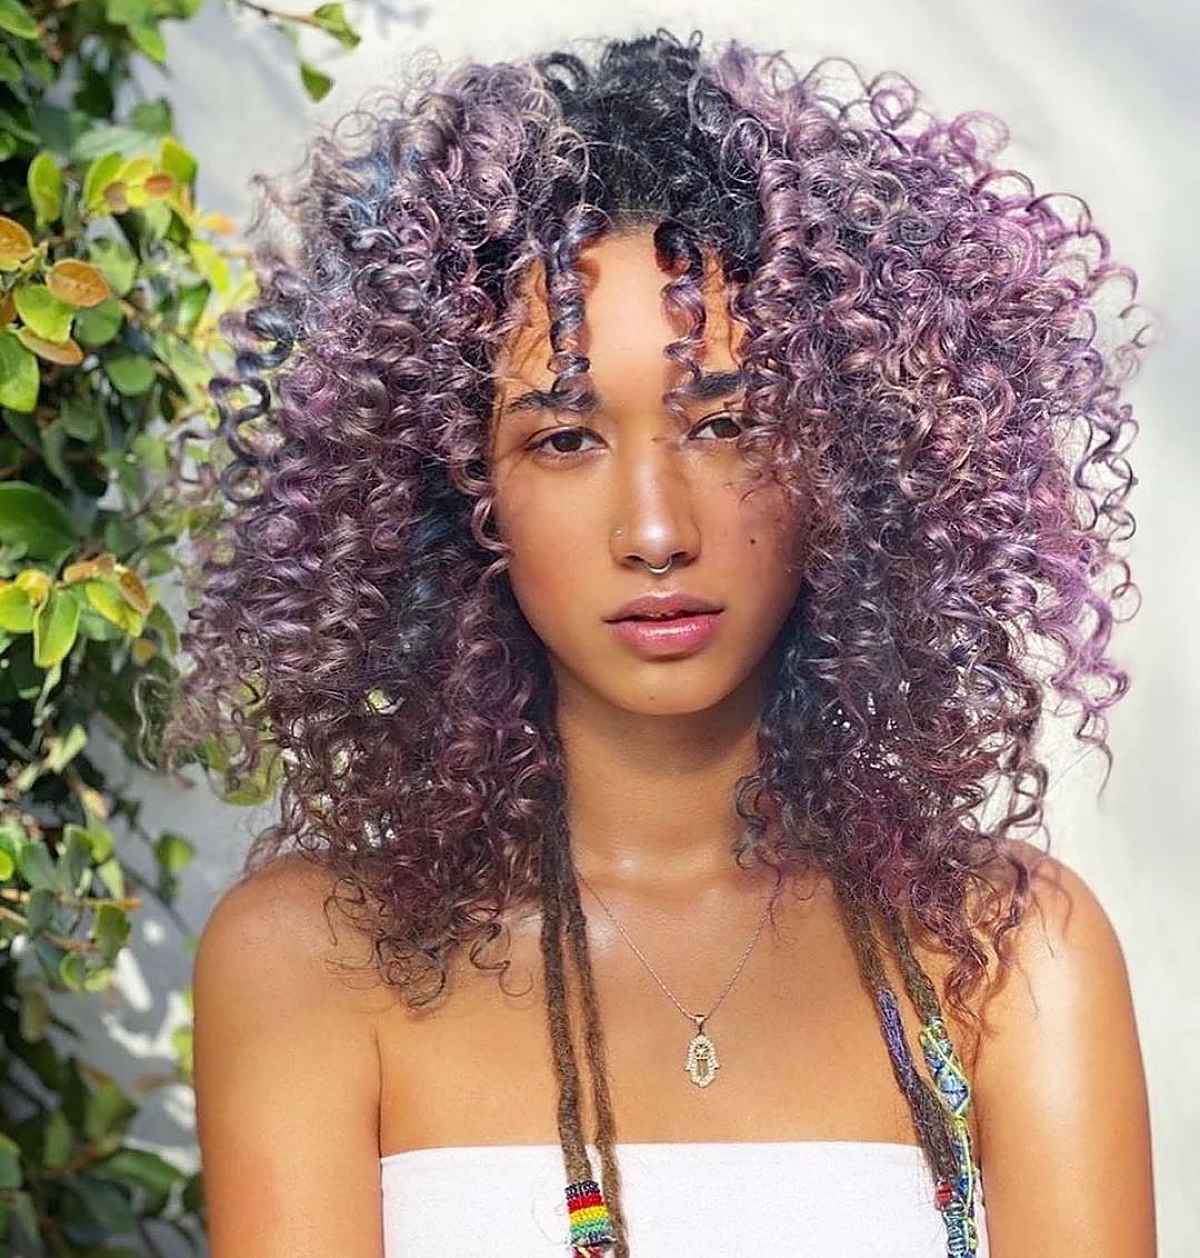 Top 22 Pastel Purple Hair Color Ideas You'll See in 2023